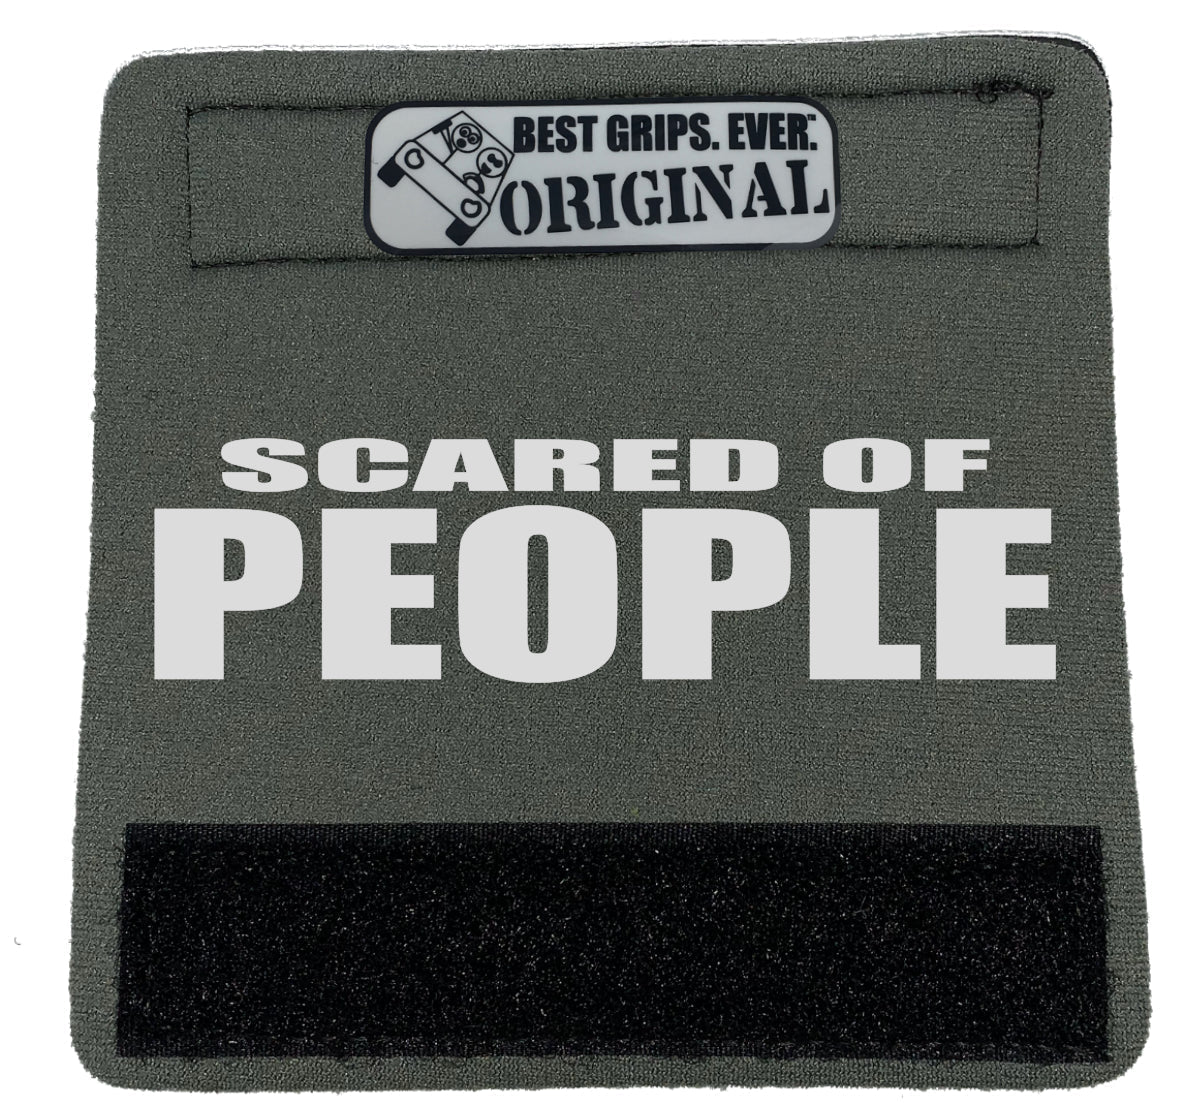 SCARED OF PEOPLE Grip